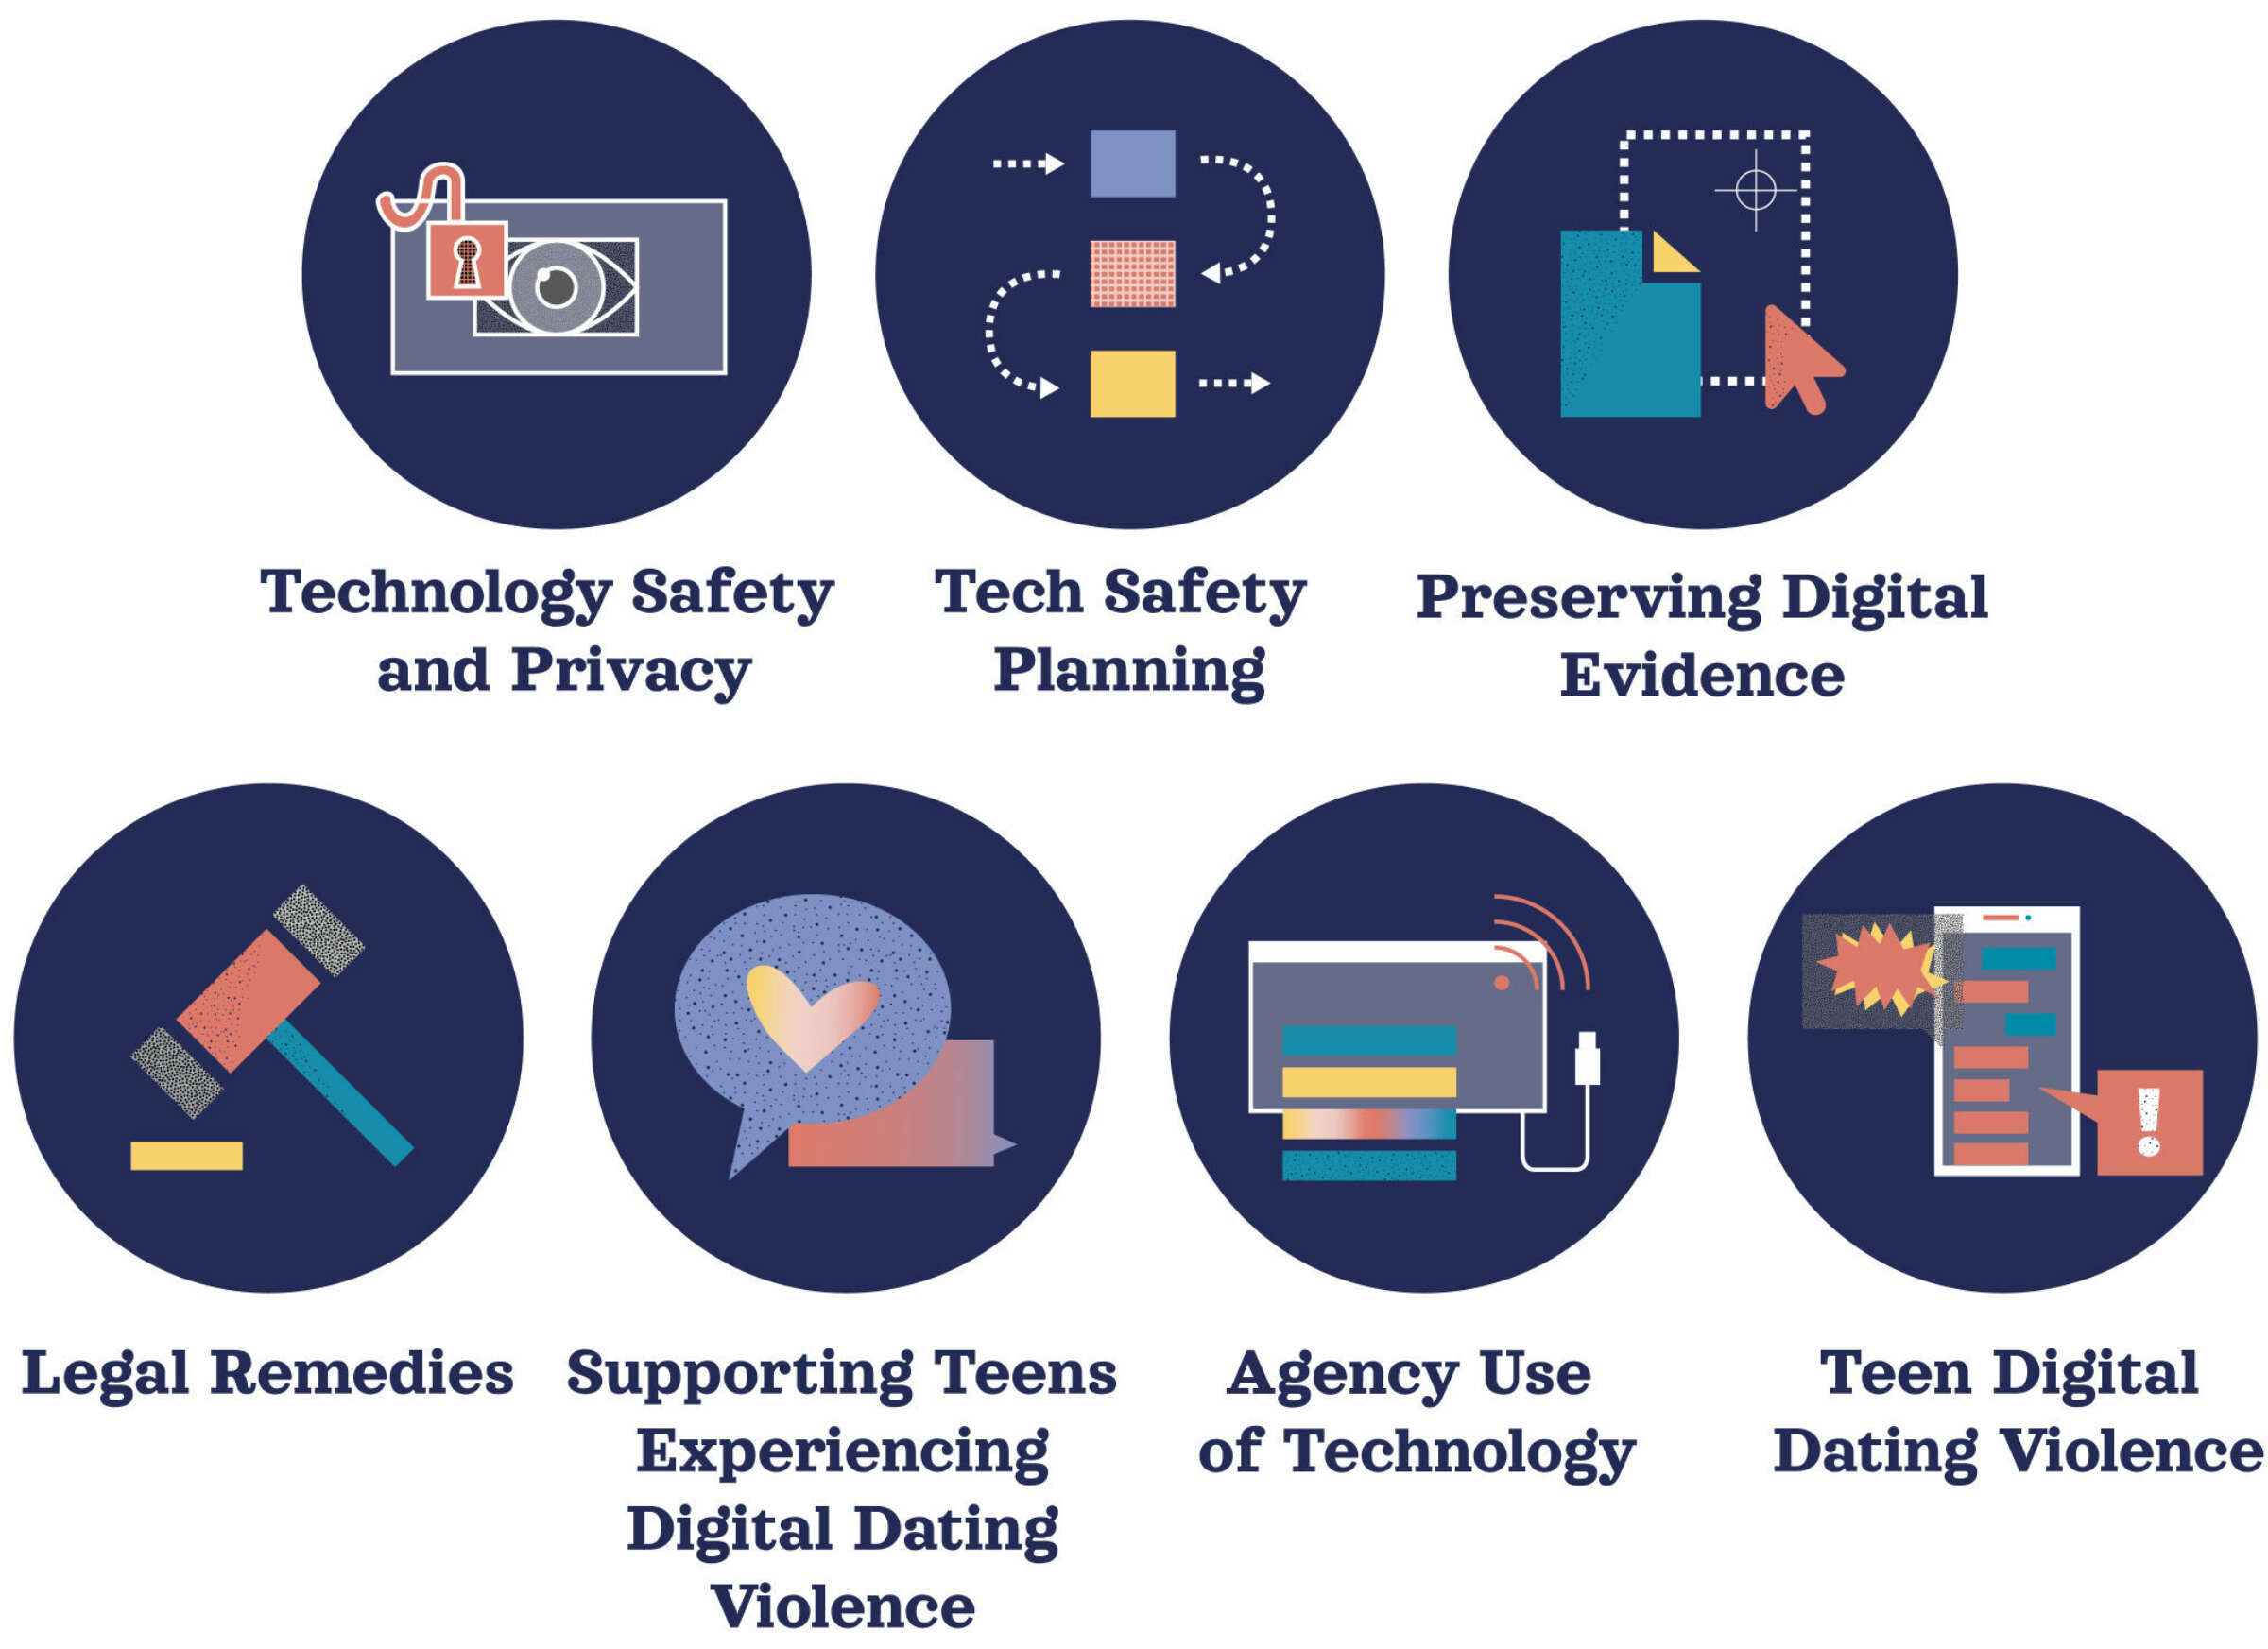 A graphic with six icons representing different aspects of digital safety: Technology Safety and Privacy, Tech Safety Planning, Preserving Digital Evidence, Legal Remedies, Supporting Teens Experiencing Digital Dating Violence, and Agency Use of Technology.